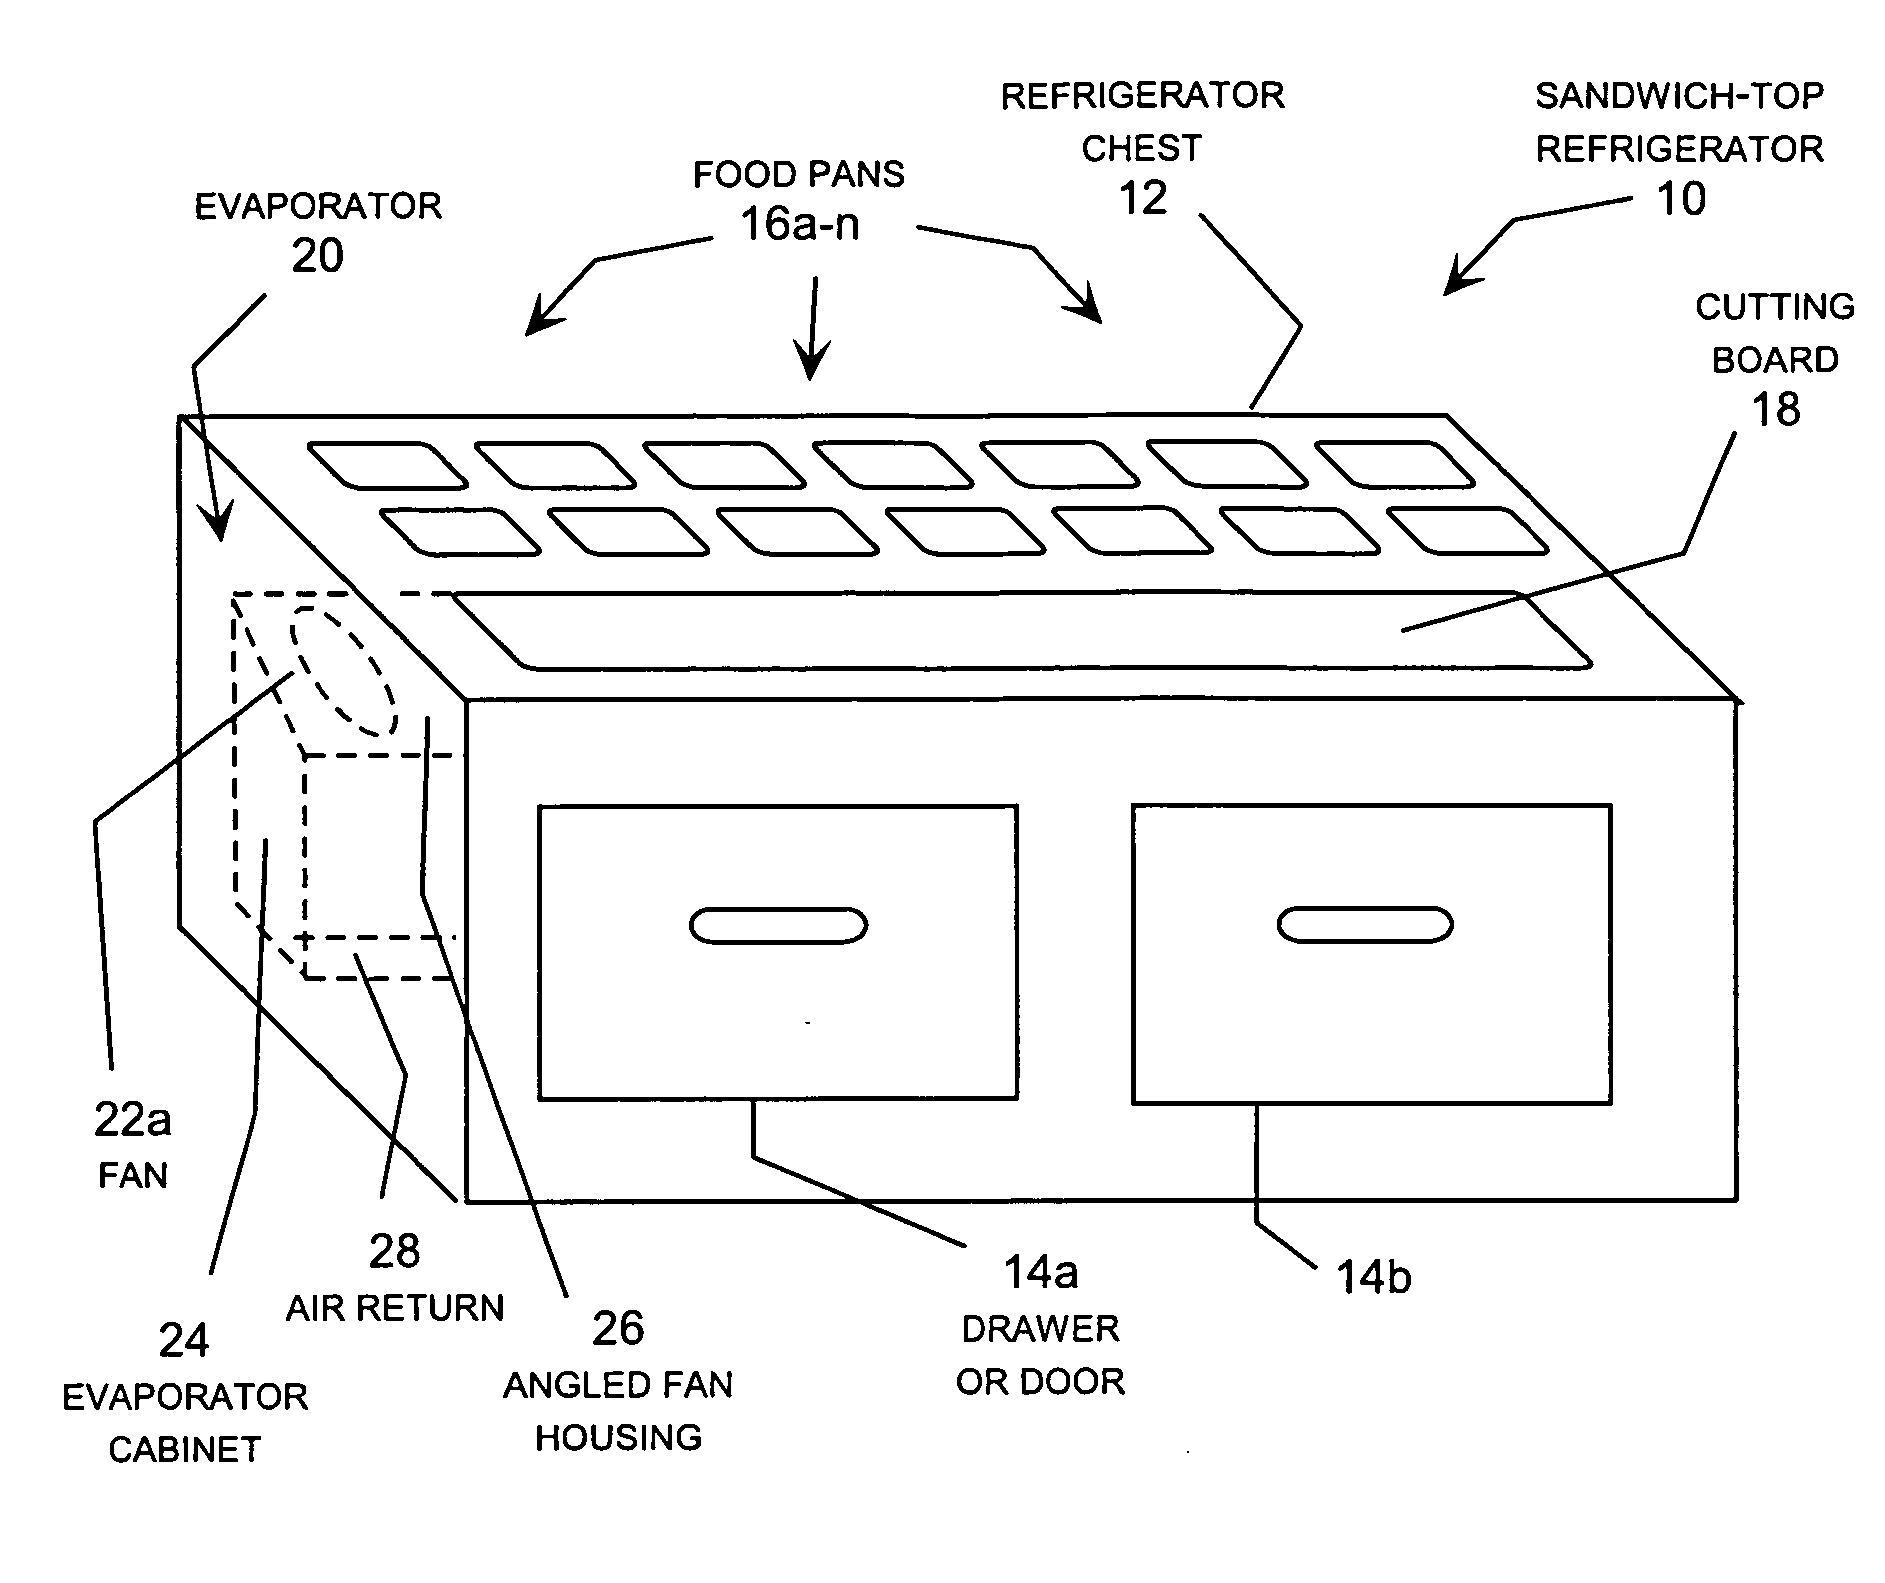 Evaporator and associated food pan refrigerator with an angled fan housing